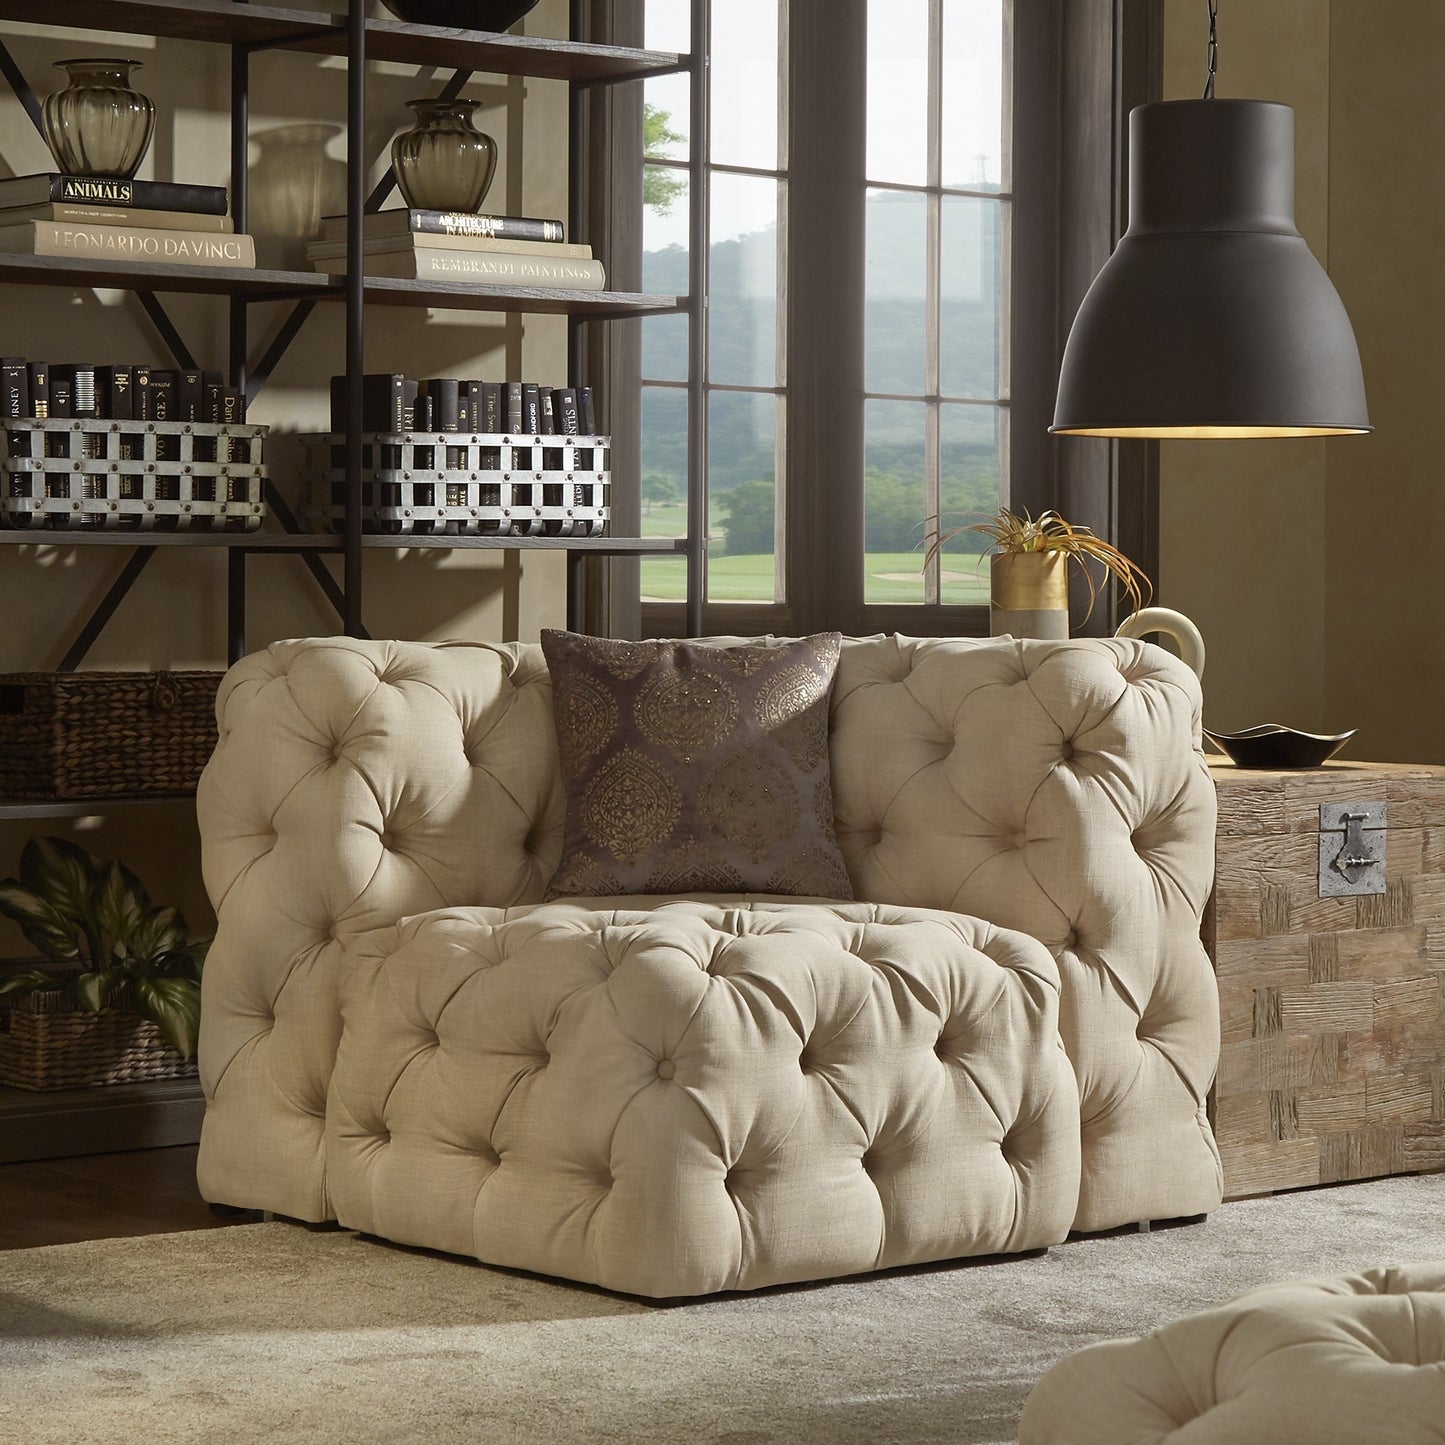 Beige Linen Tufted Chesterfield Modular Sectional - 6-Seat, L-Shaped, Single Arm Sectional